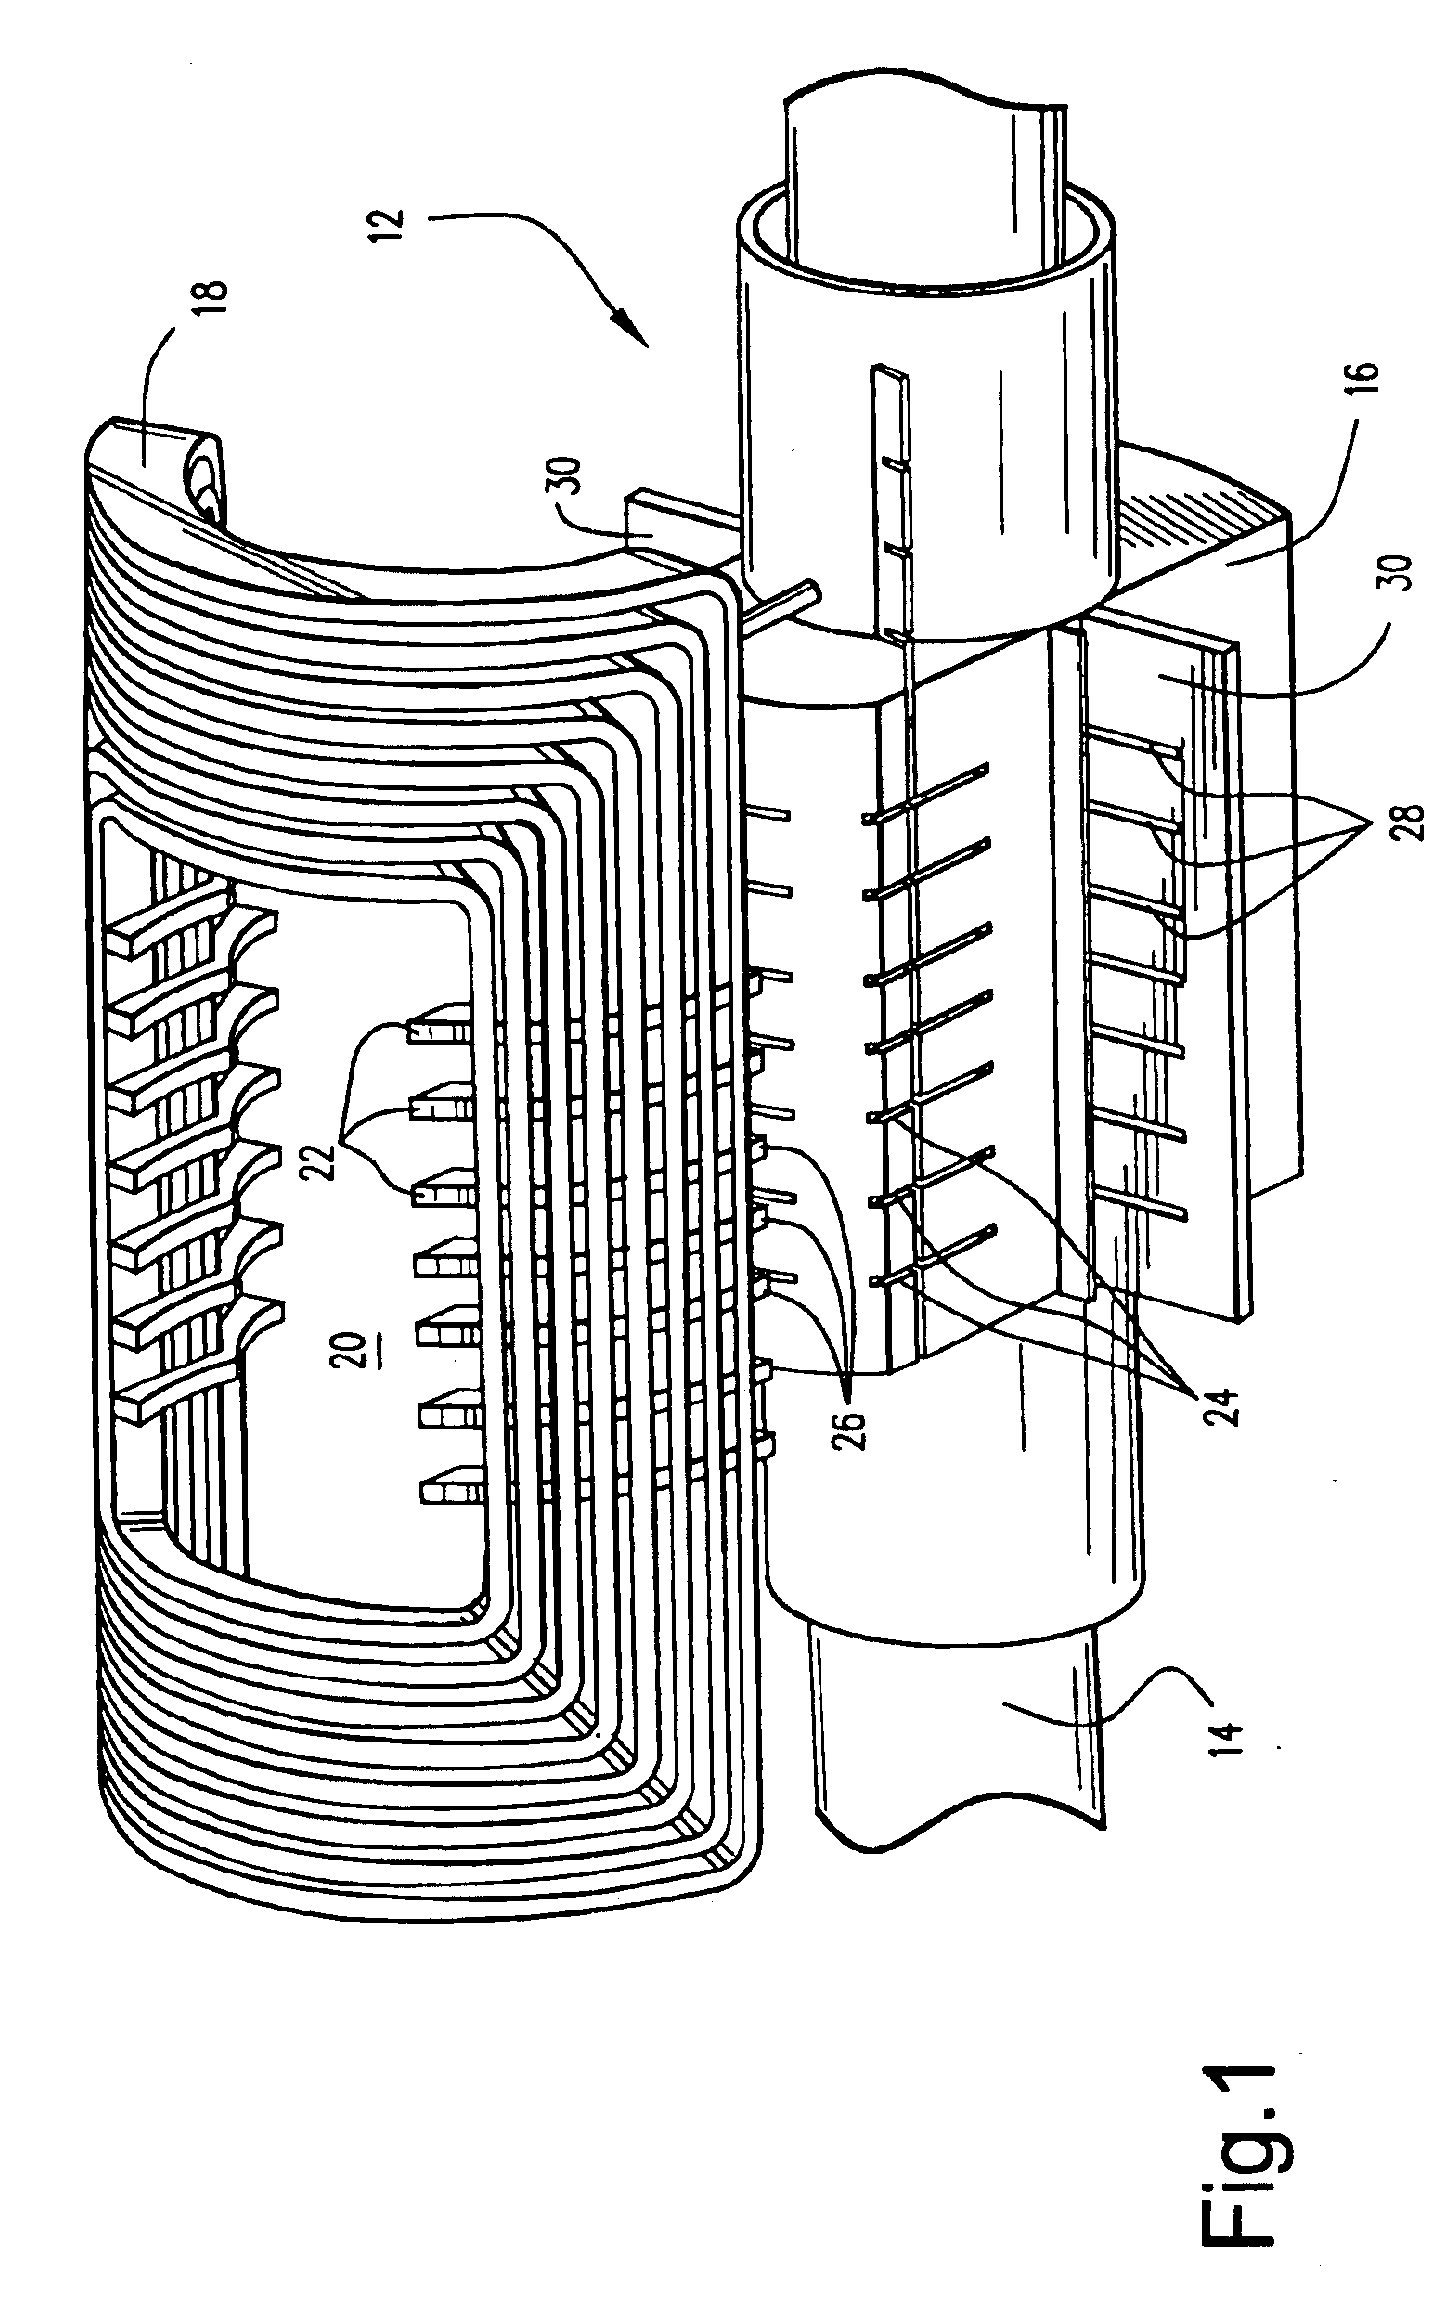 Structural enclosed rotor configuration for electric machine